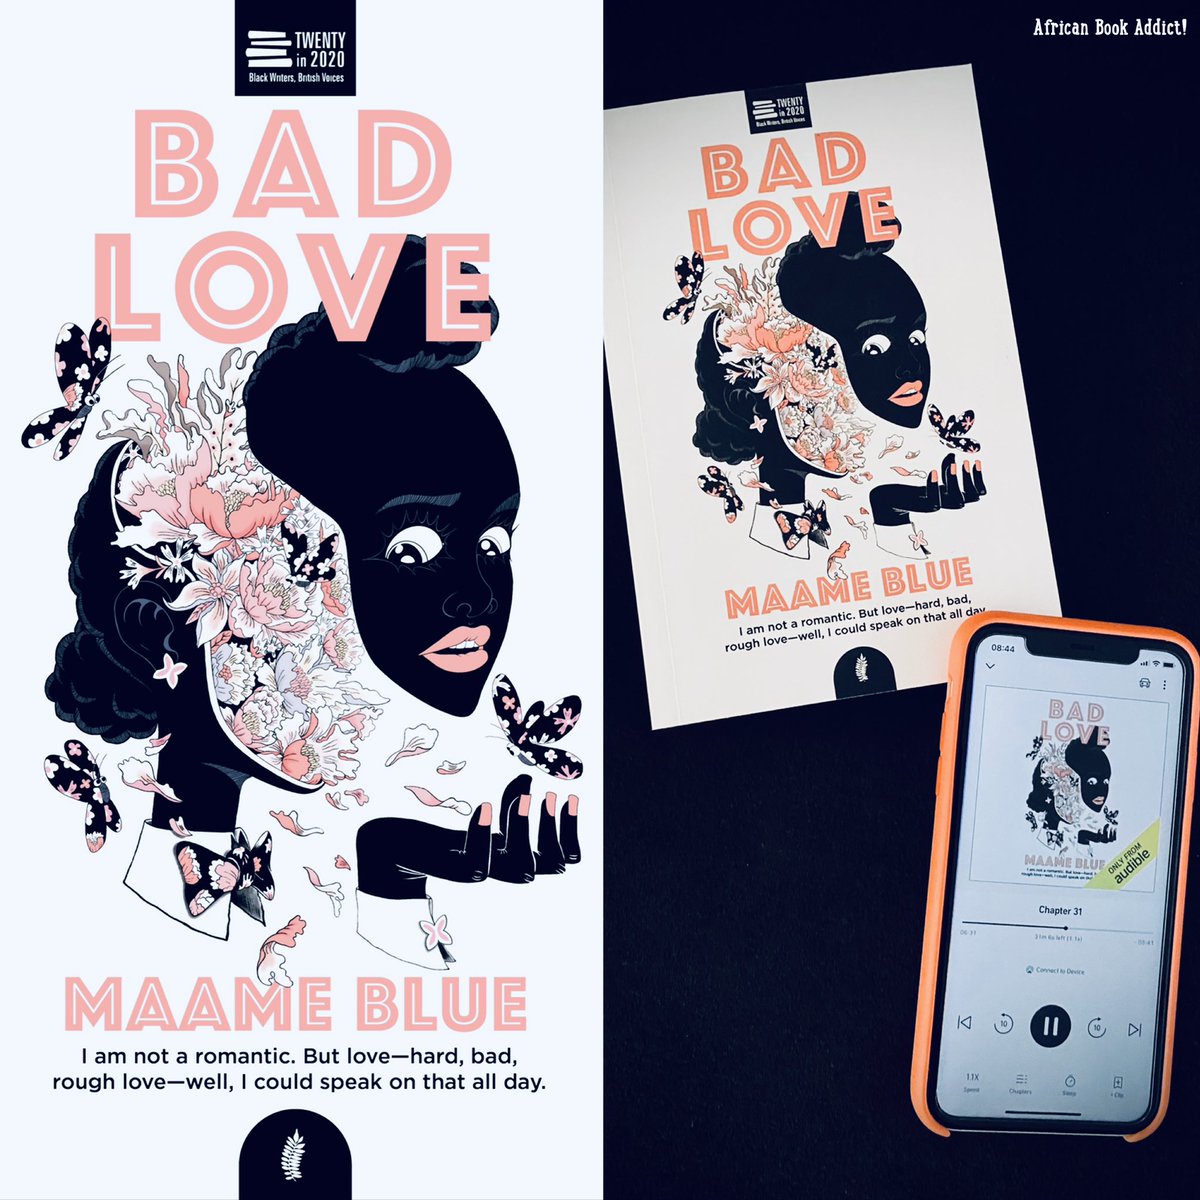 Book review | Bad Love by Maame Blue africanbookaddict.com/2020/11/27/bad… 

I double-fisted this debut by listening to the book via Audible alongside reading the paperback 🙂. 

#BlackBritishLiterature #ReadGhanaian🇬🇭